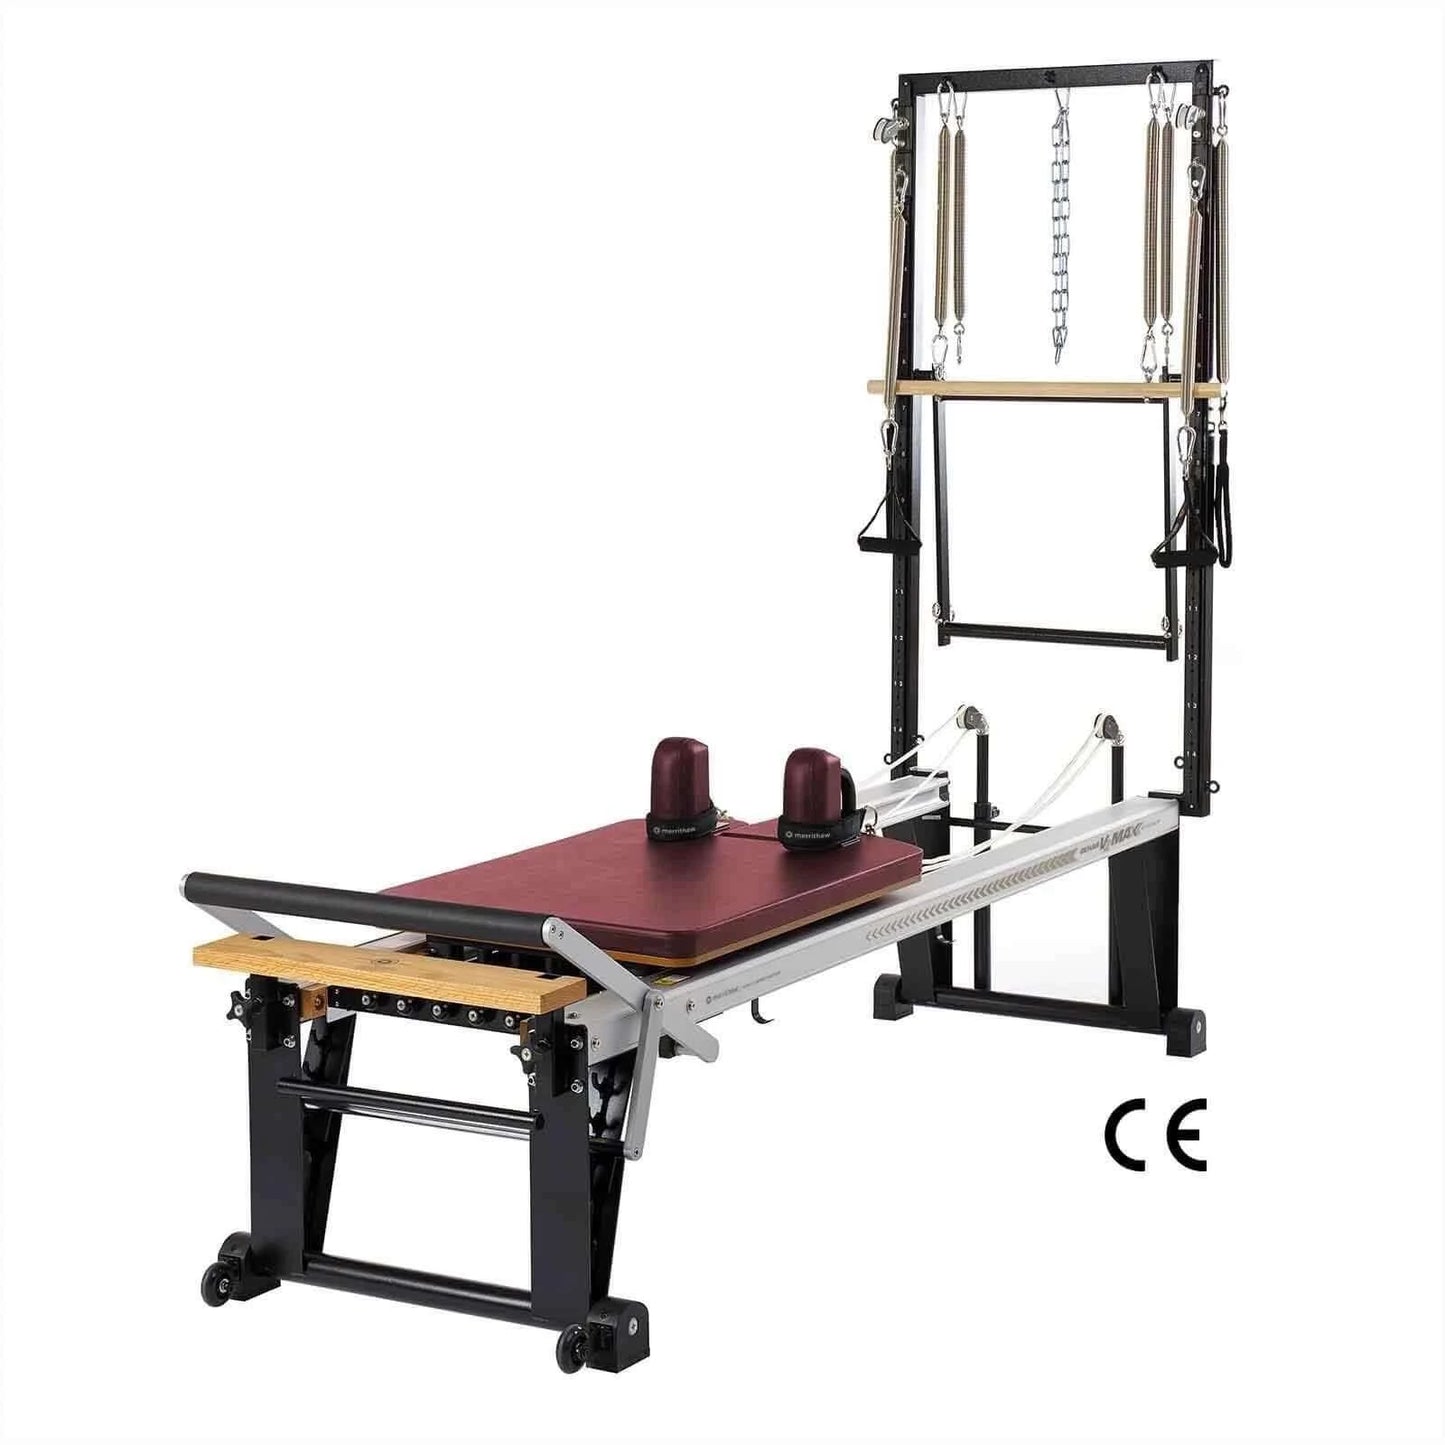 Red Truffle Merrithew™ Pilates Rehab V2 Max Plus™ Reformer Machine by Merrithew™ sold by Pilates Matters® by BSP LLC